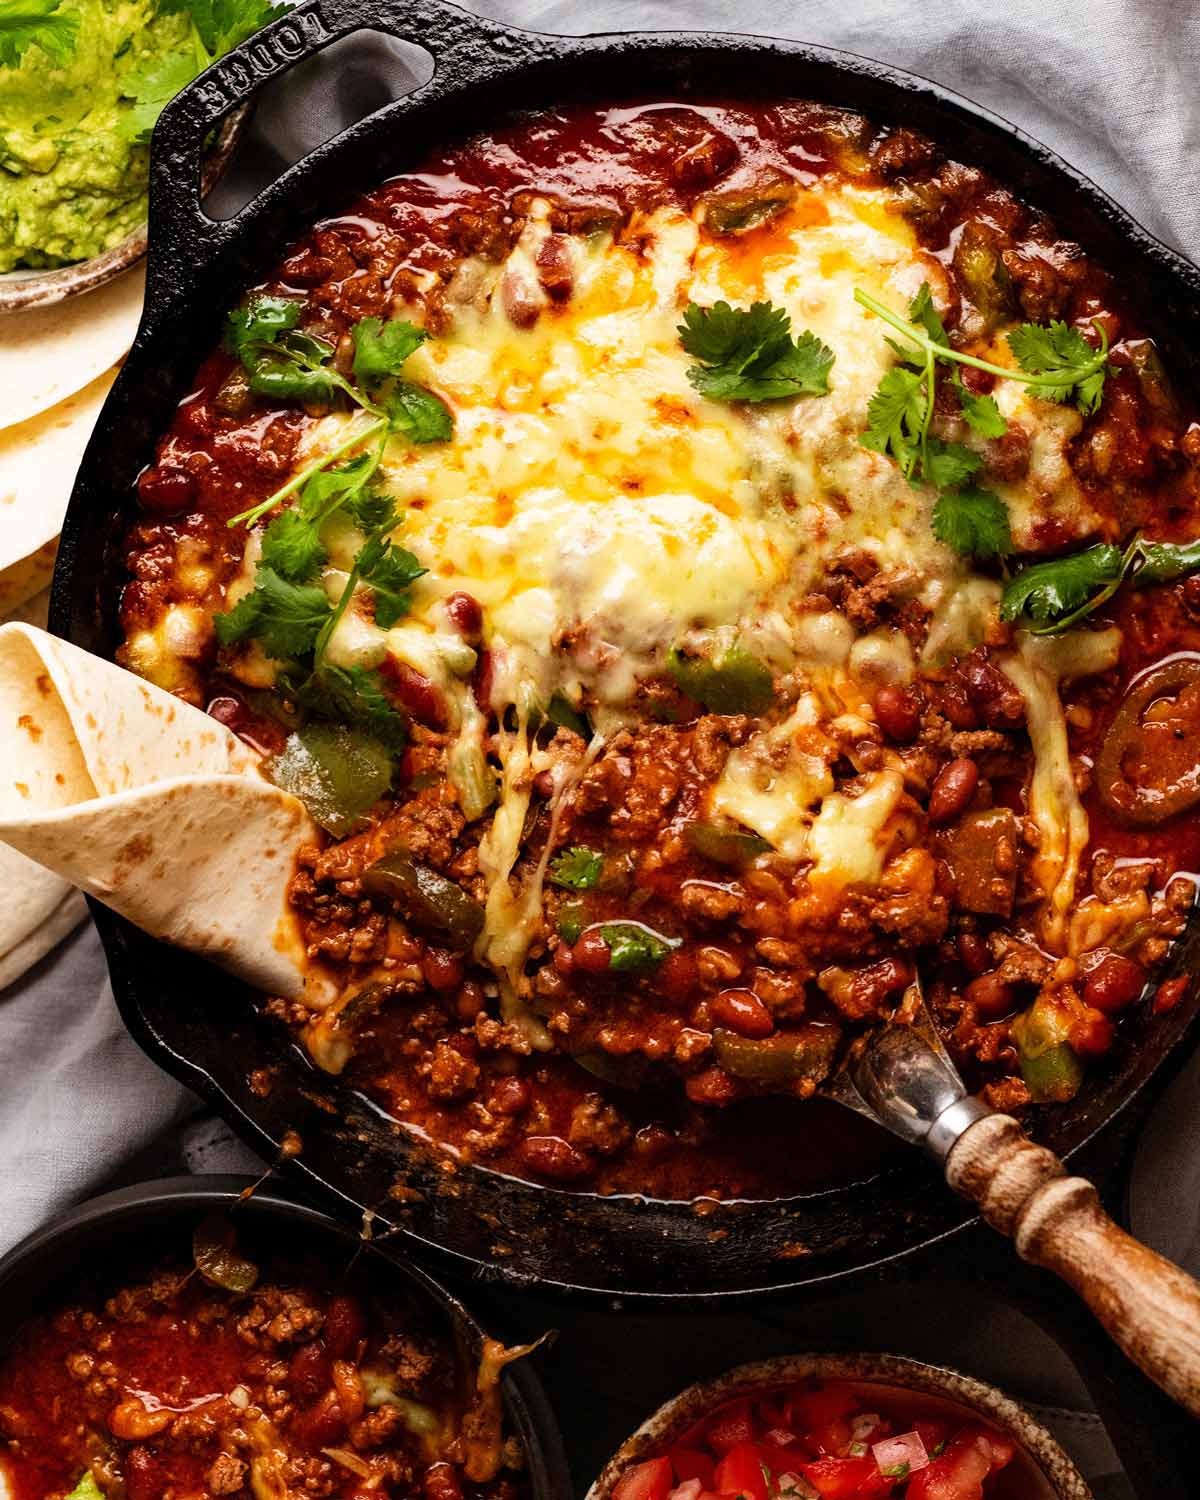 Taco Bake Casserole Recipe: A Perfect Fusion of Mexican and American Flavors